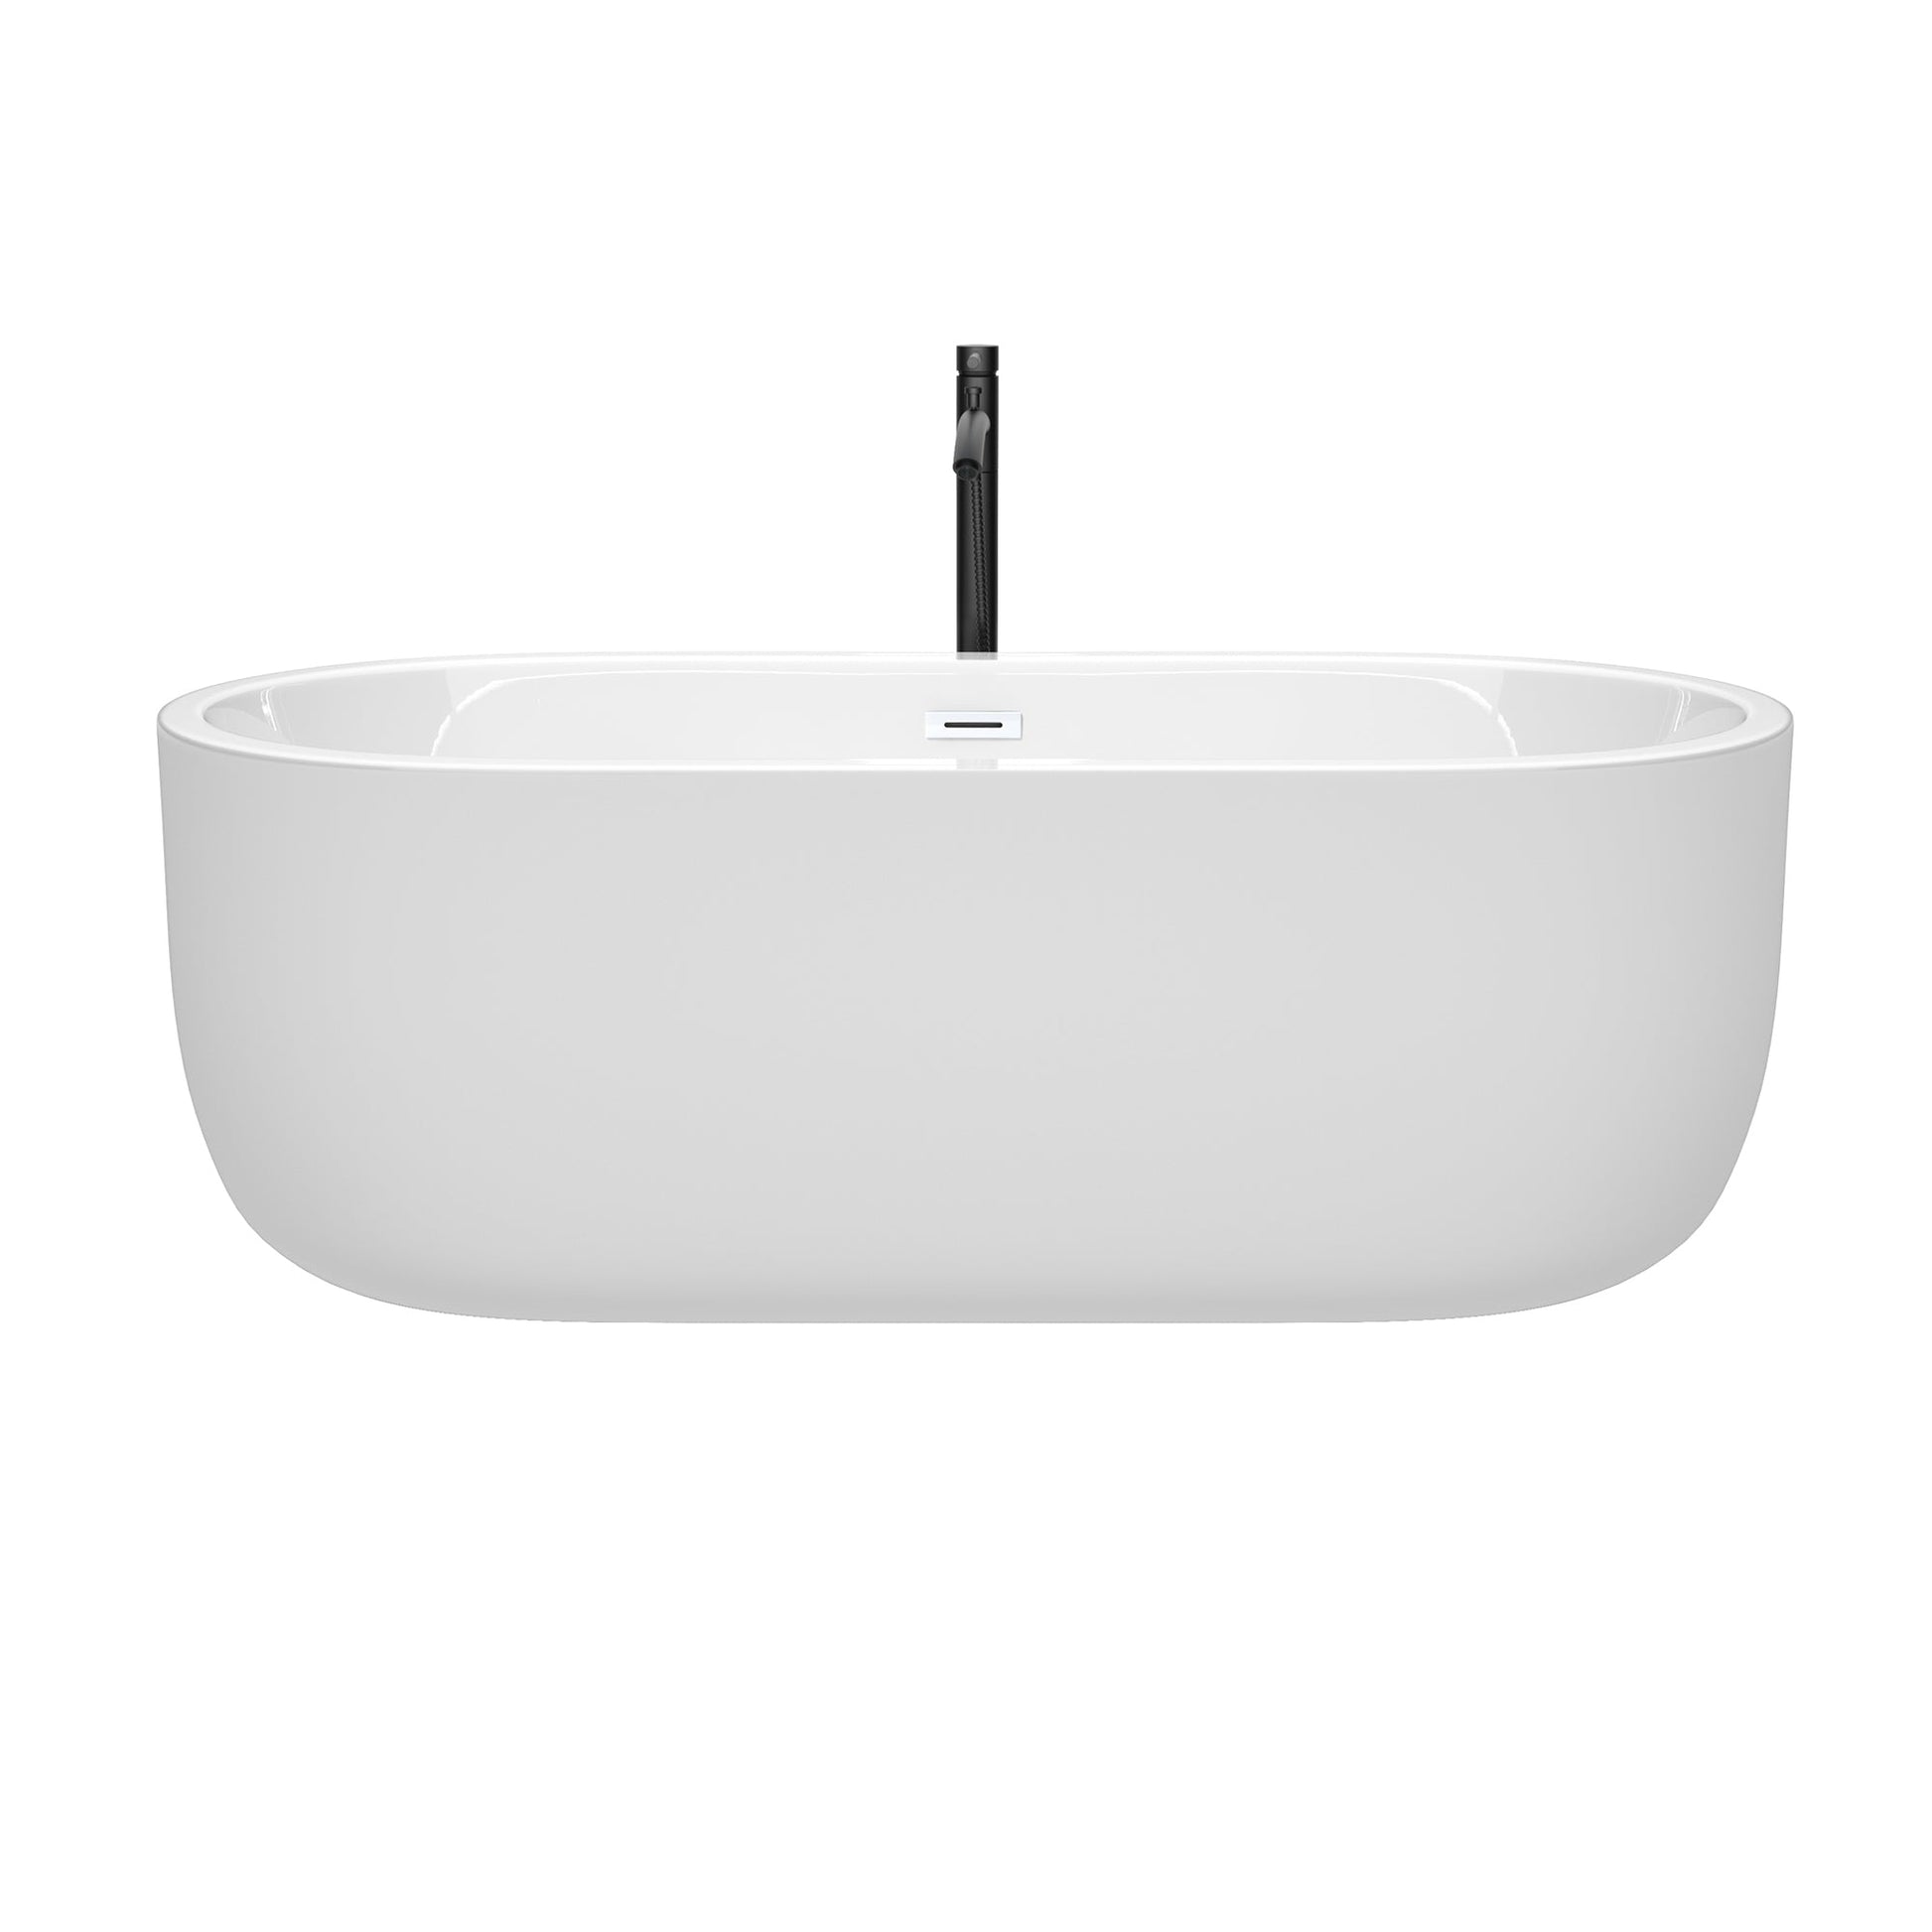 Wyndham Collection Juliette 67" Freestanding Bathtub in White With Shiny White Trim and Floor Mounted Faucet in Matte Black